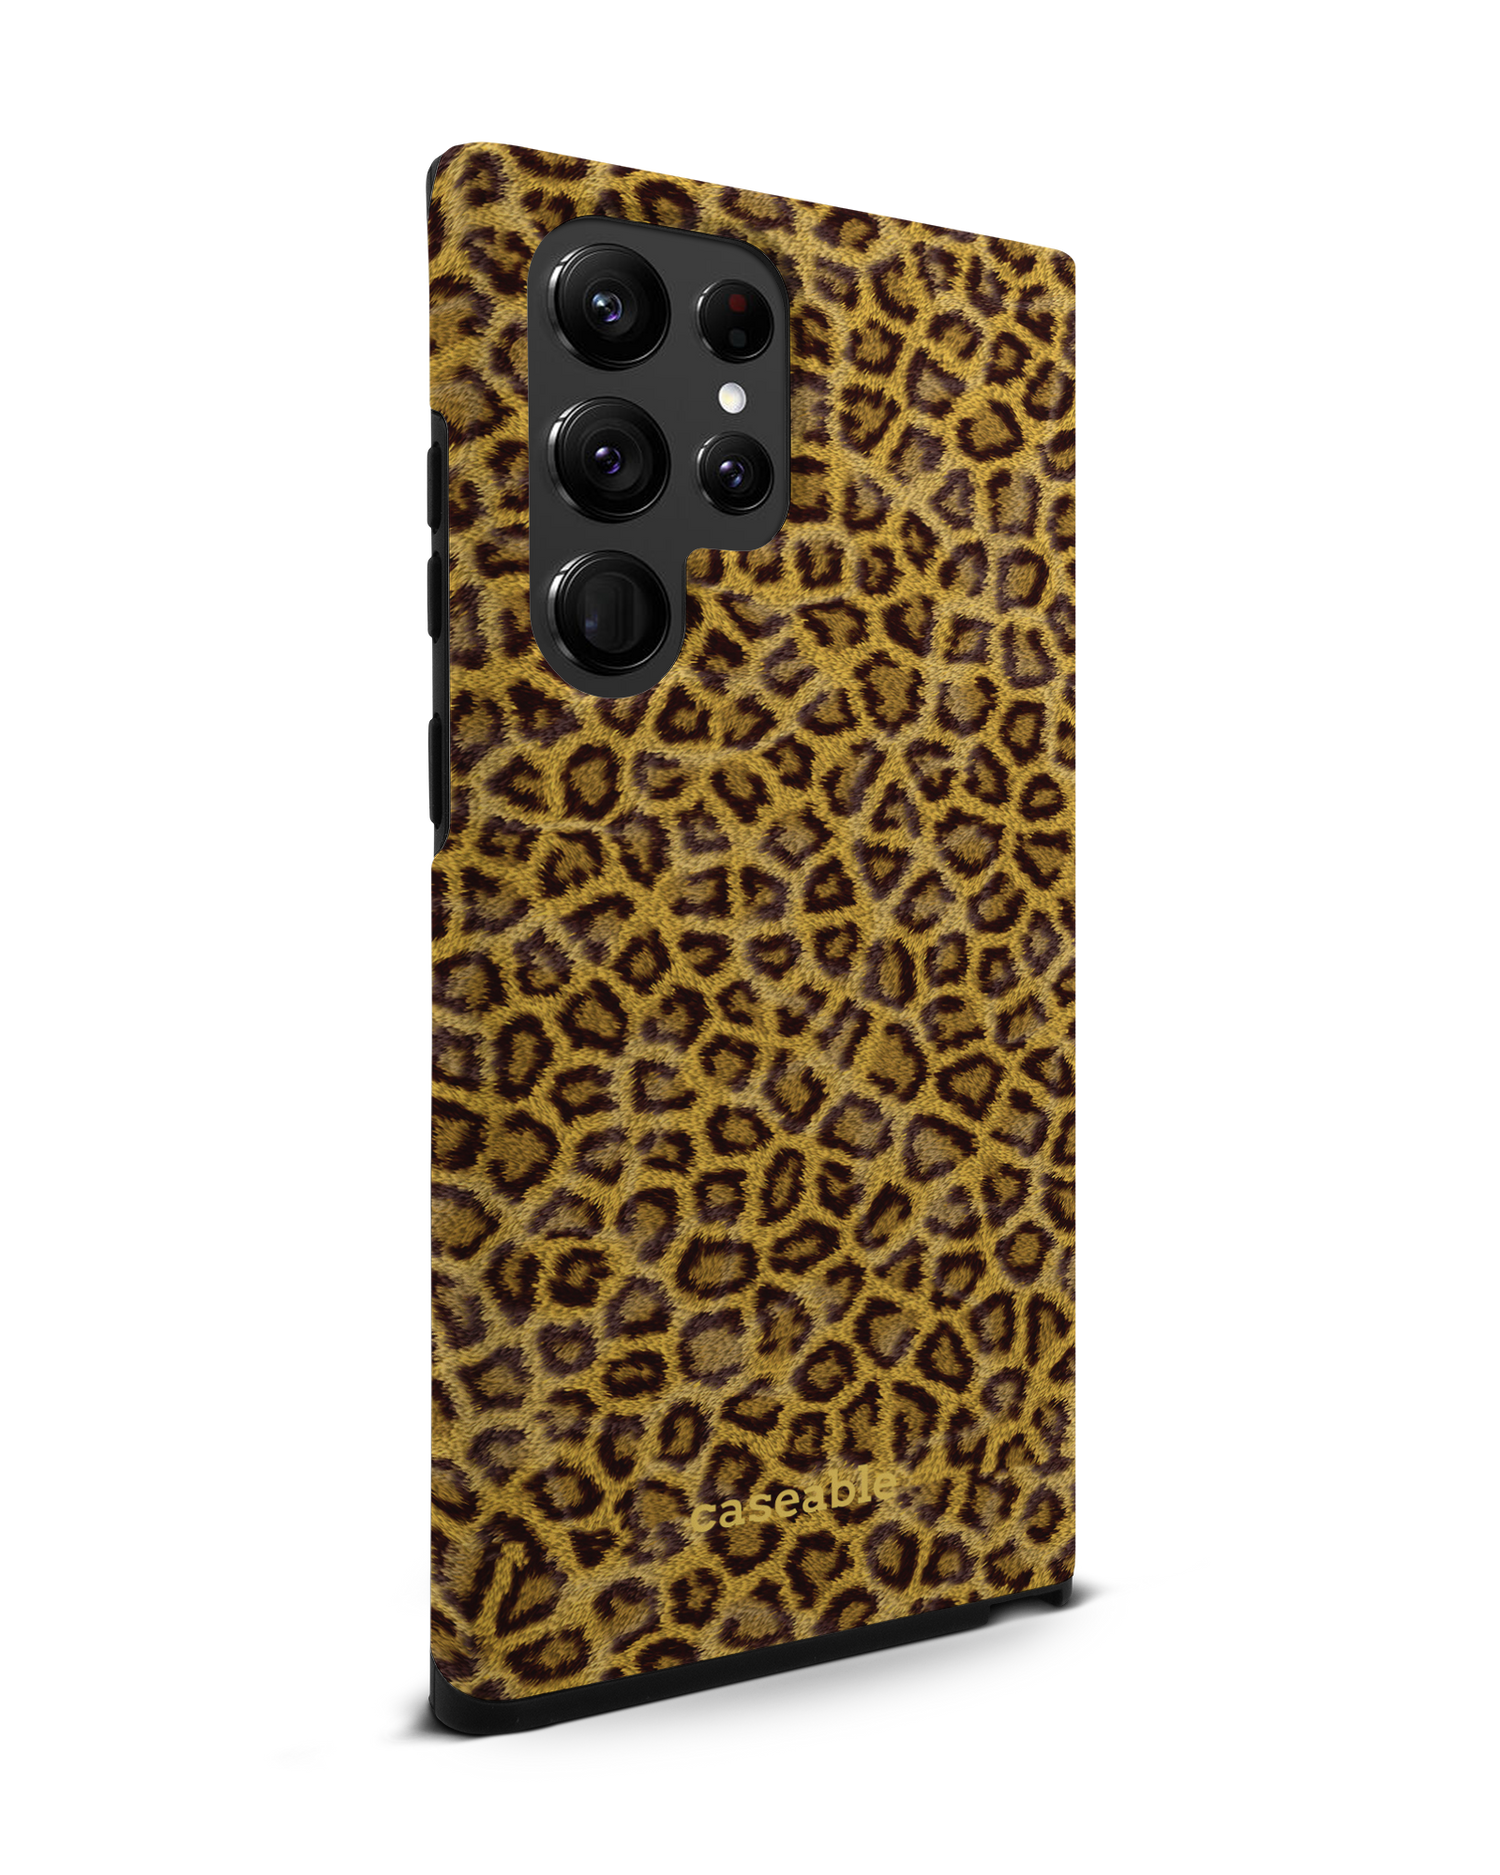 Leopard Skin Premium Phone Case Samsung Galaxy S22 Ultra 5G: View from the left side